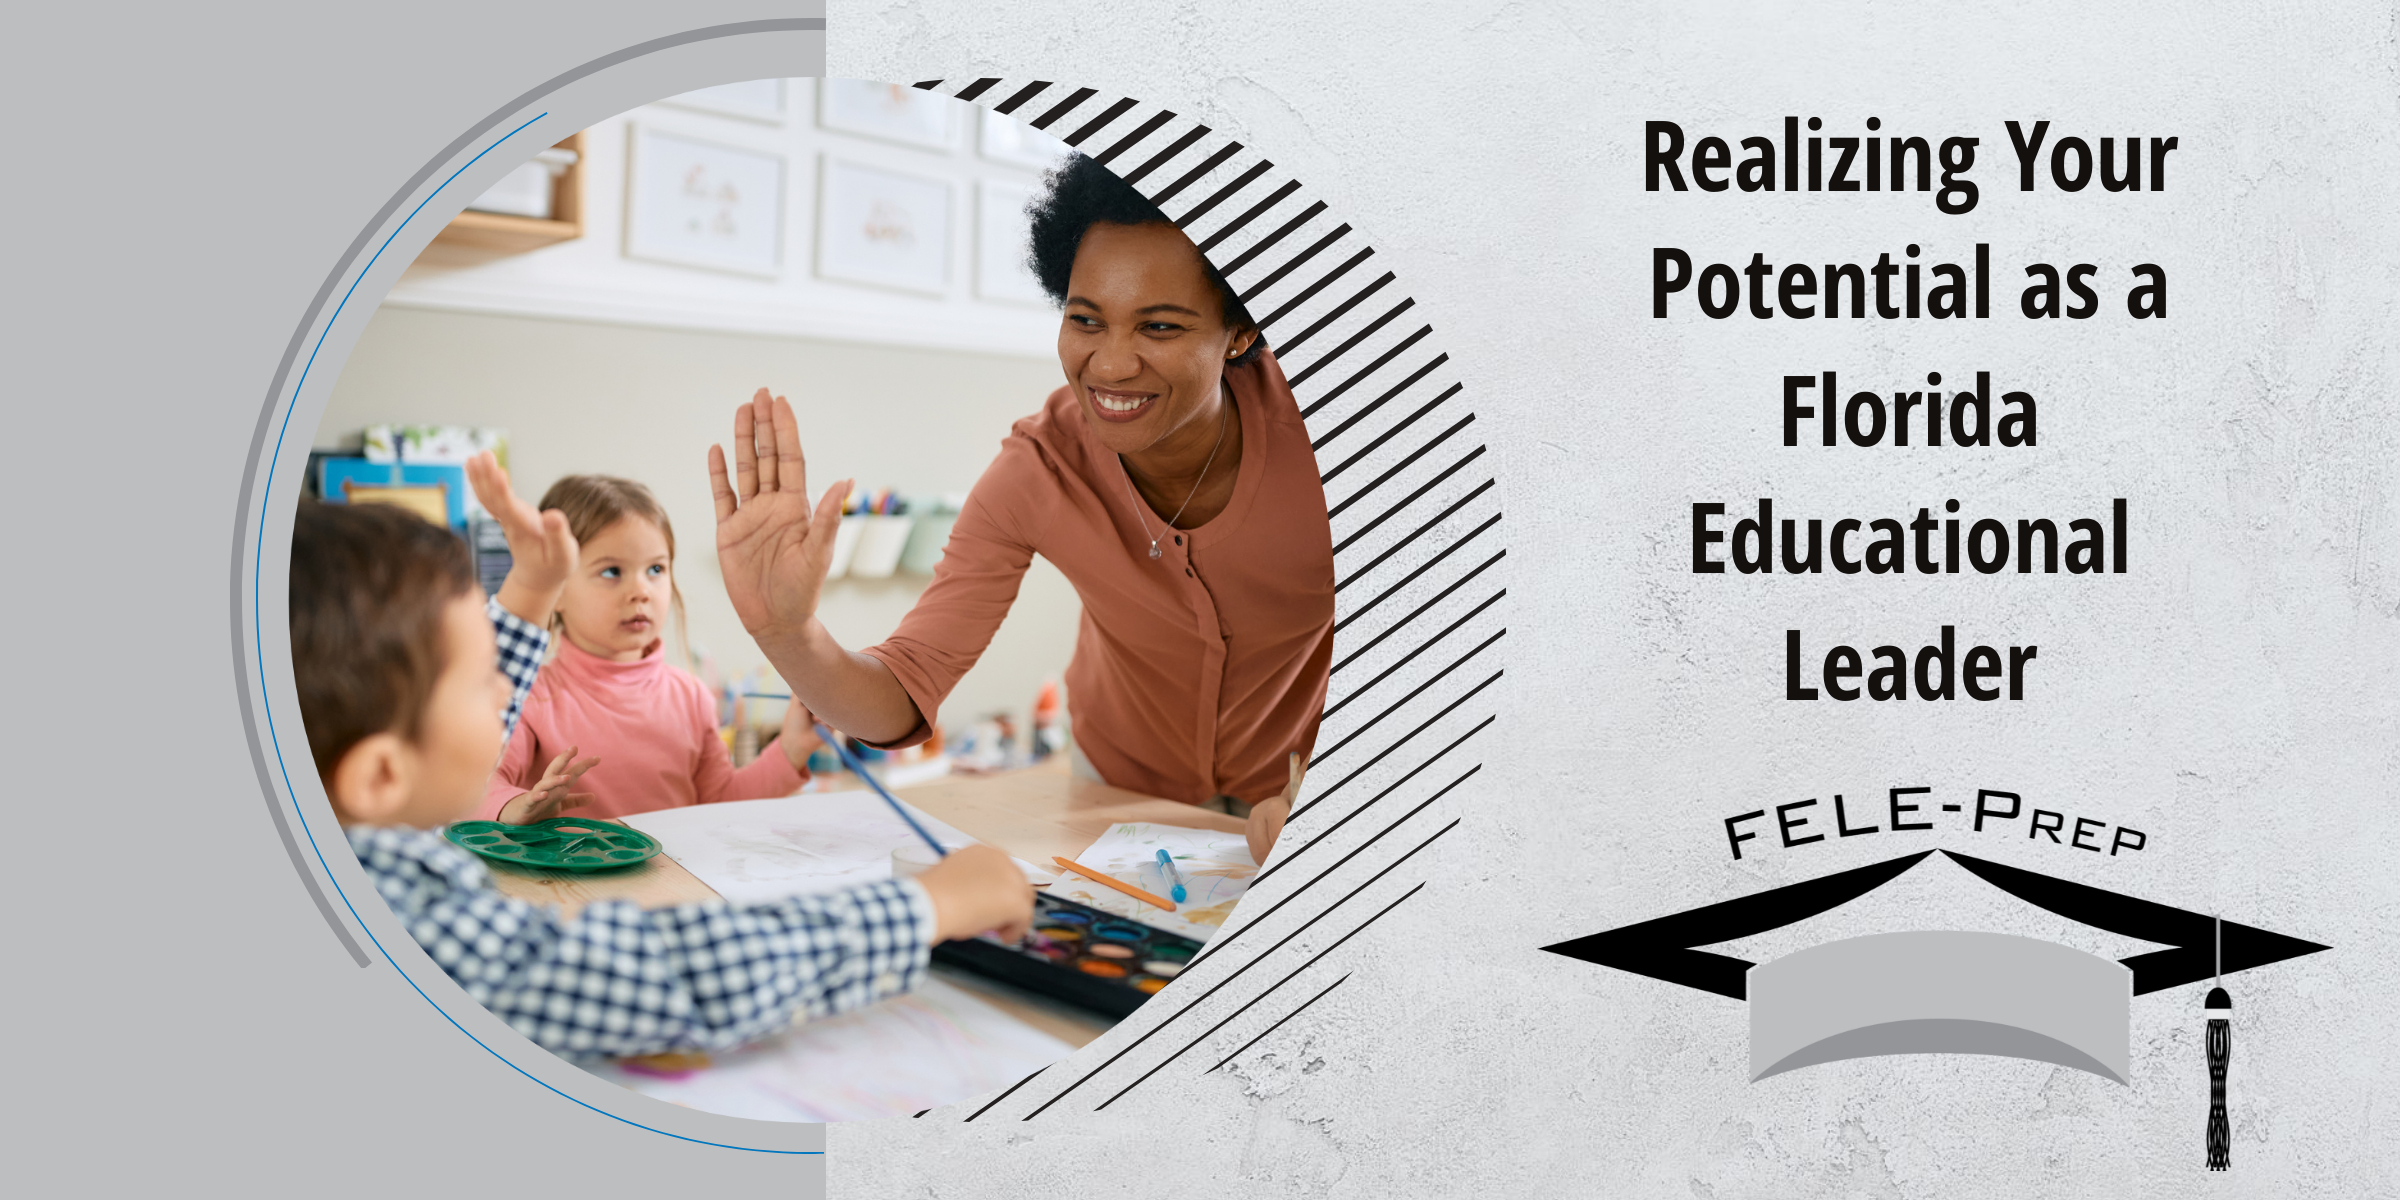 Realizing Your Potential as a Florida Educational Leader